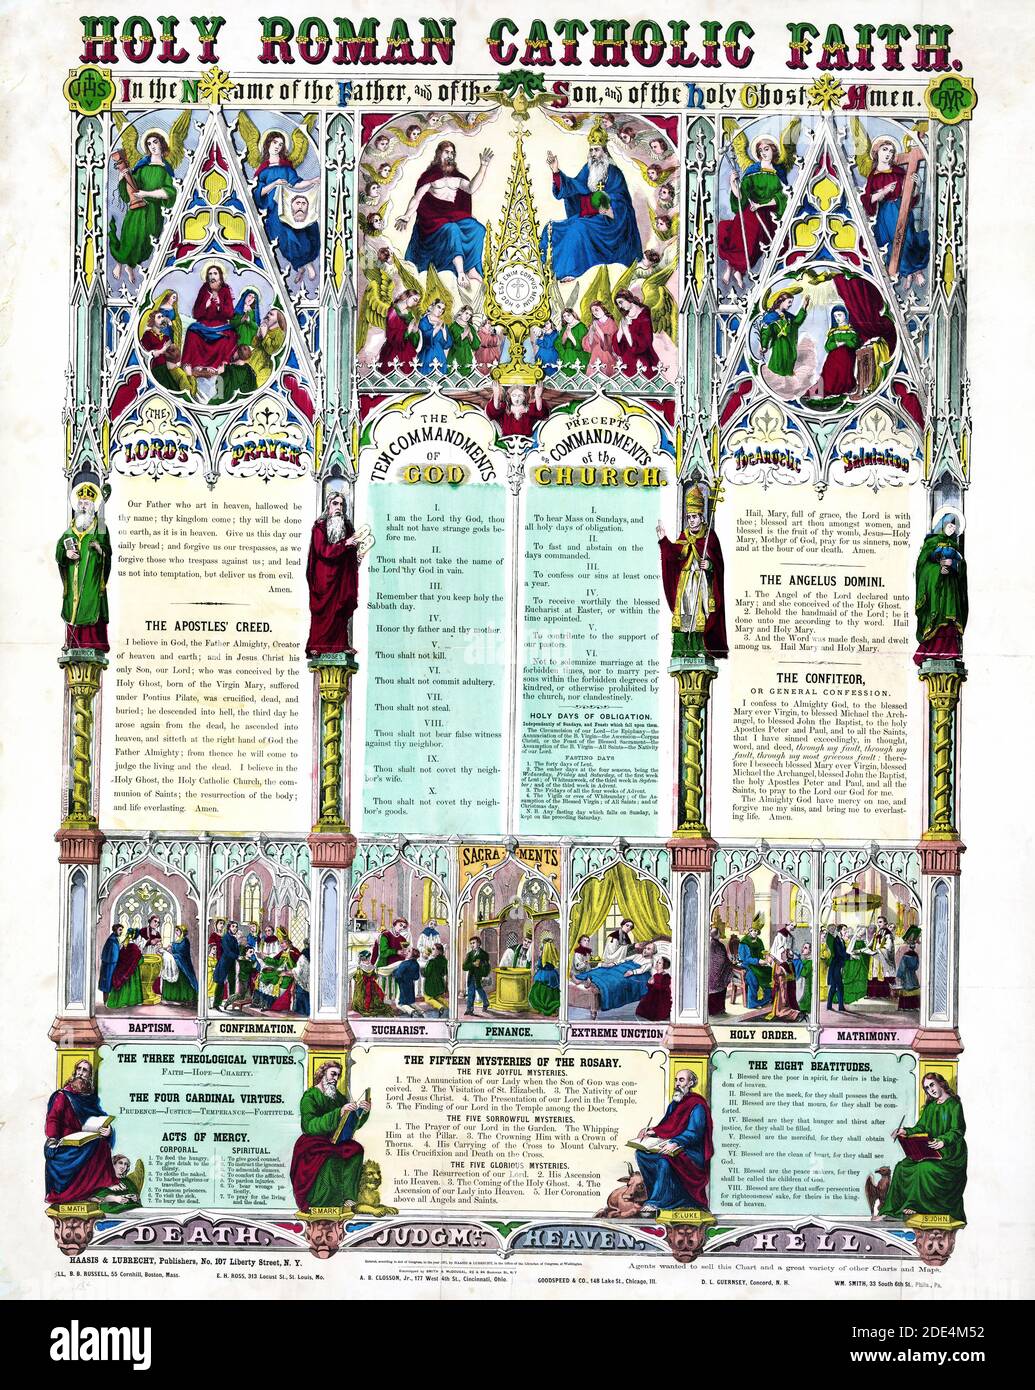 Print showing biblical scenes related to the Roman Catholic faith; includes text of prayers; such as The Lord's Prayer; The Apostles' Creed; The Confiteor; as well as The Ten Commandments of God; Virtues; Mysteries of the Rosary; and the Eight Beatitudes; also portraits of saints and of Pope Pius IX. Stock Photo